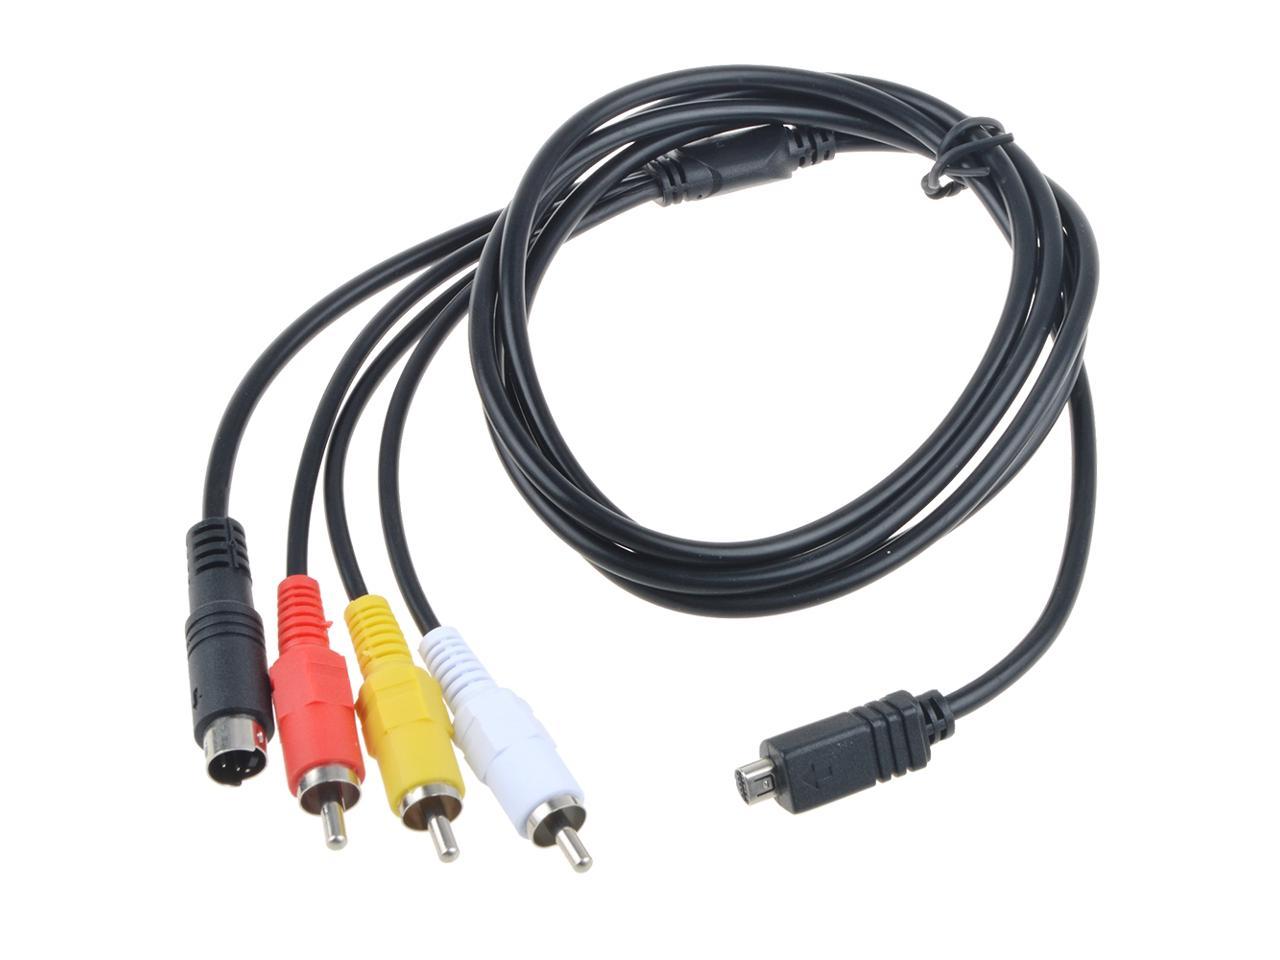 Durpower 3FT Firewire iLink 4-4 Pin DV Video Cable/Cord/Lead For Sony Camcorder DCR-HC21/e/k 